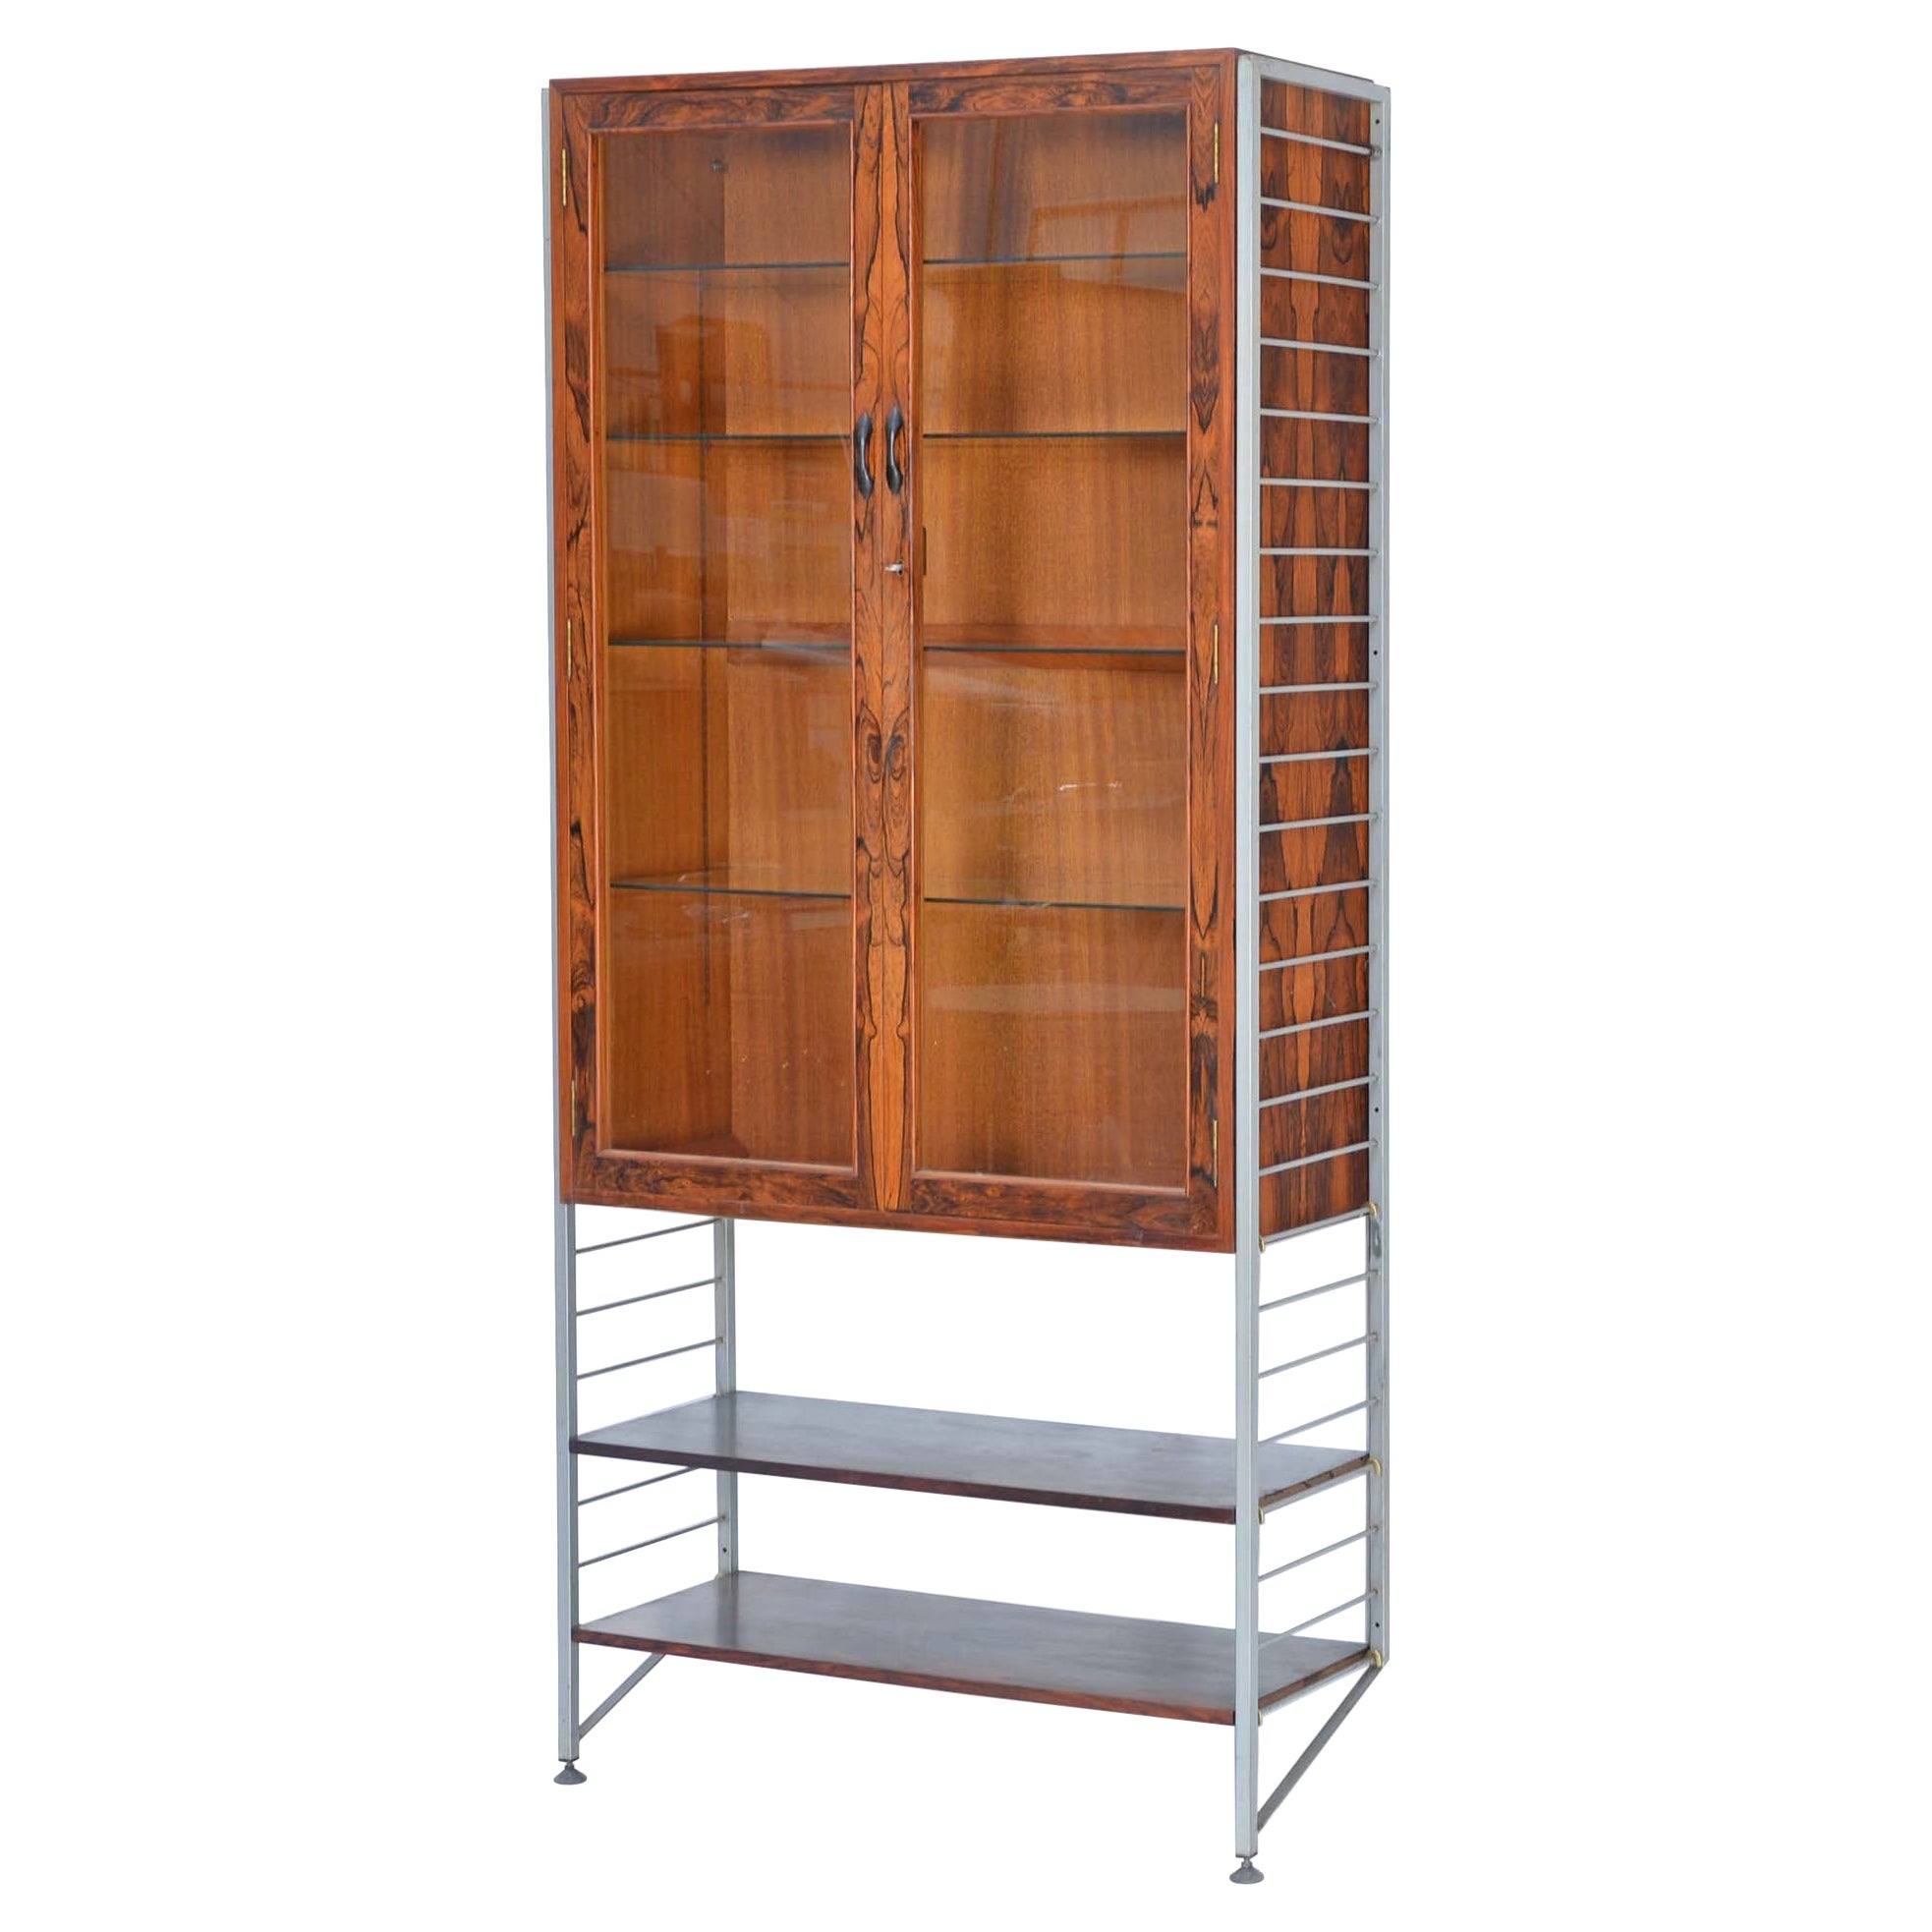 Heals Rosewood Ladderax cabinet, or drinks cabinet, for Staples of Cricklewood